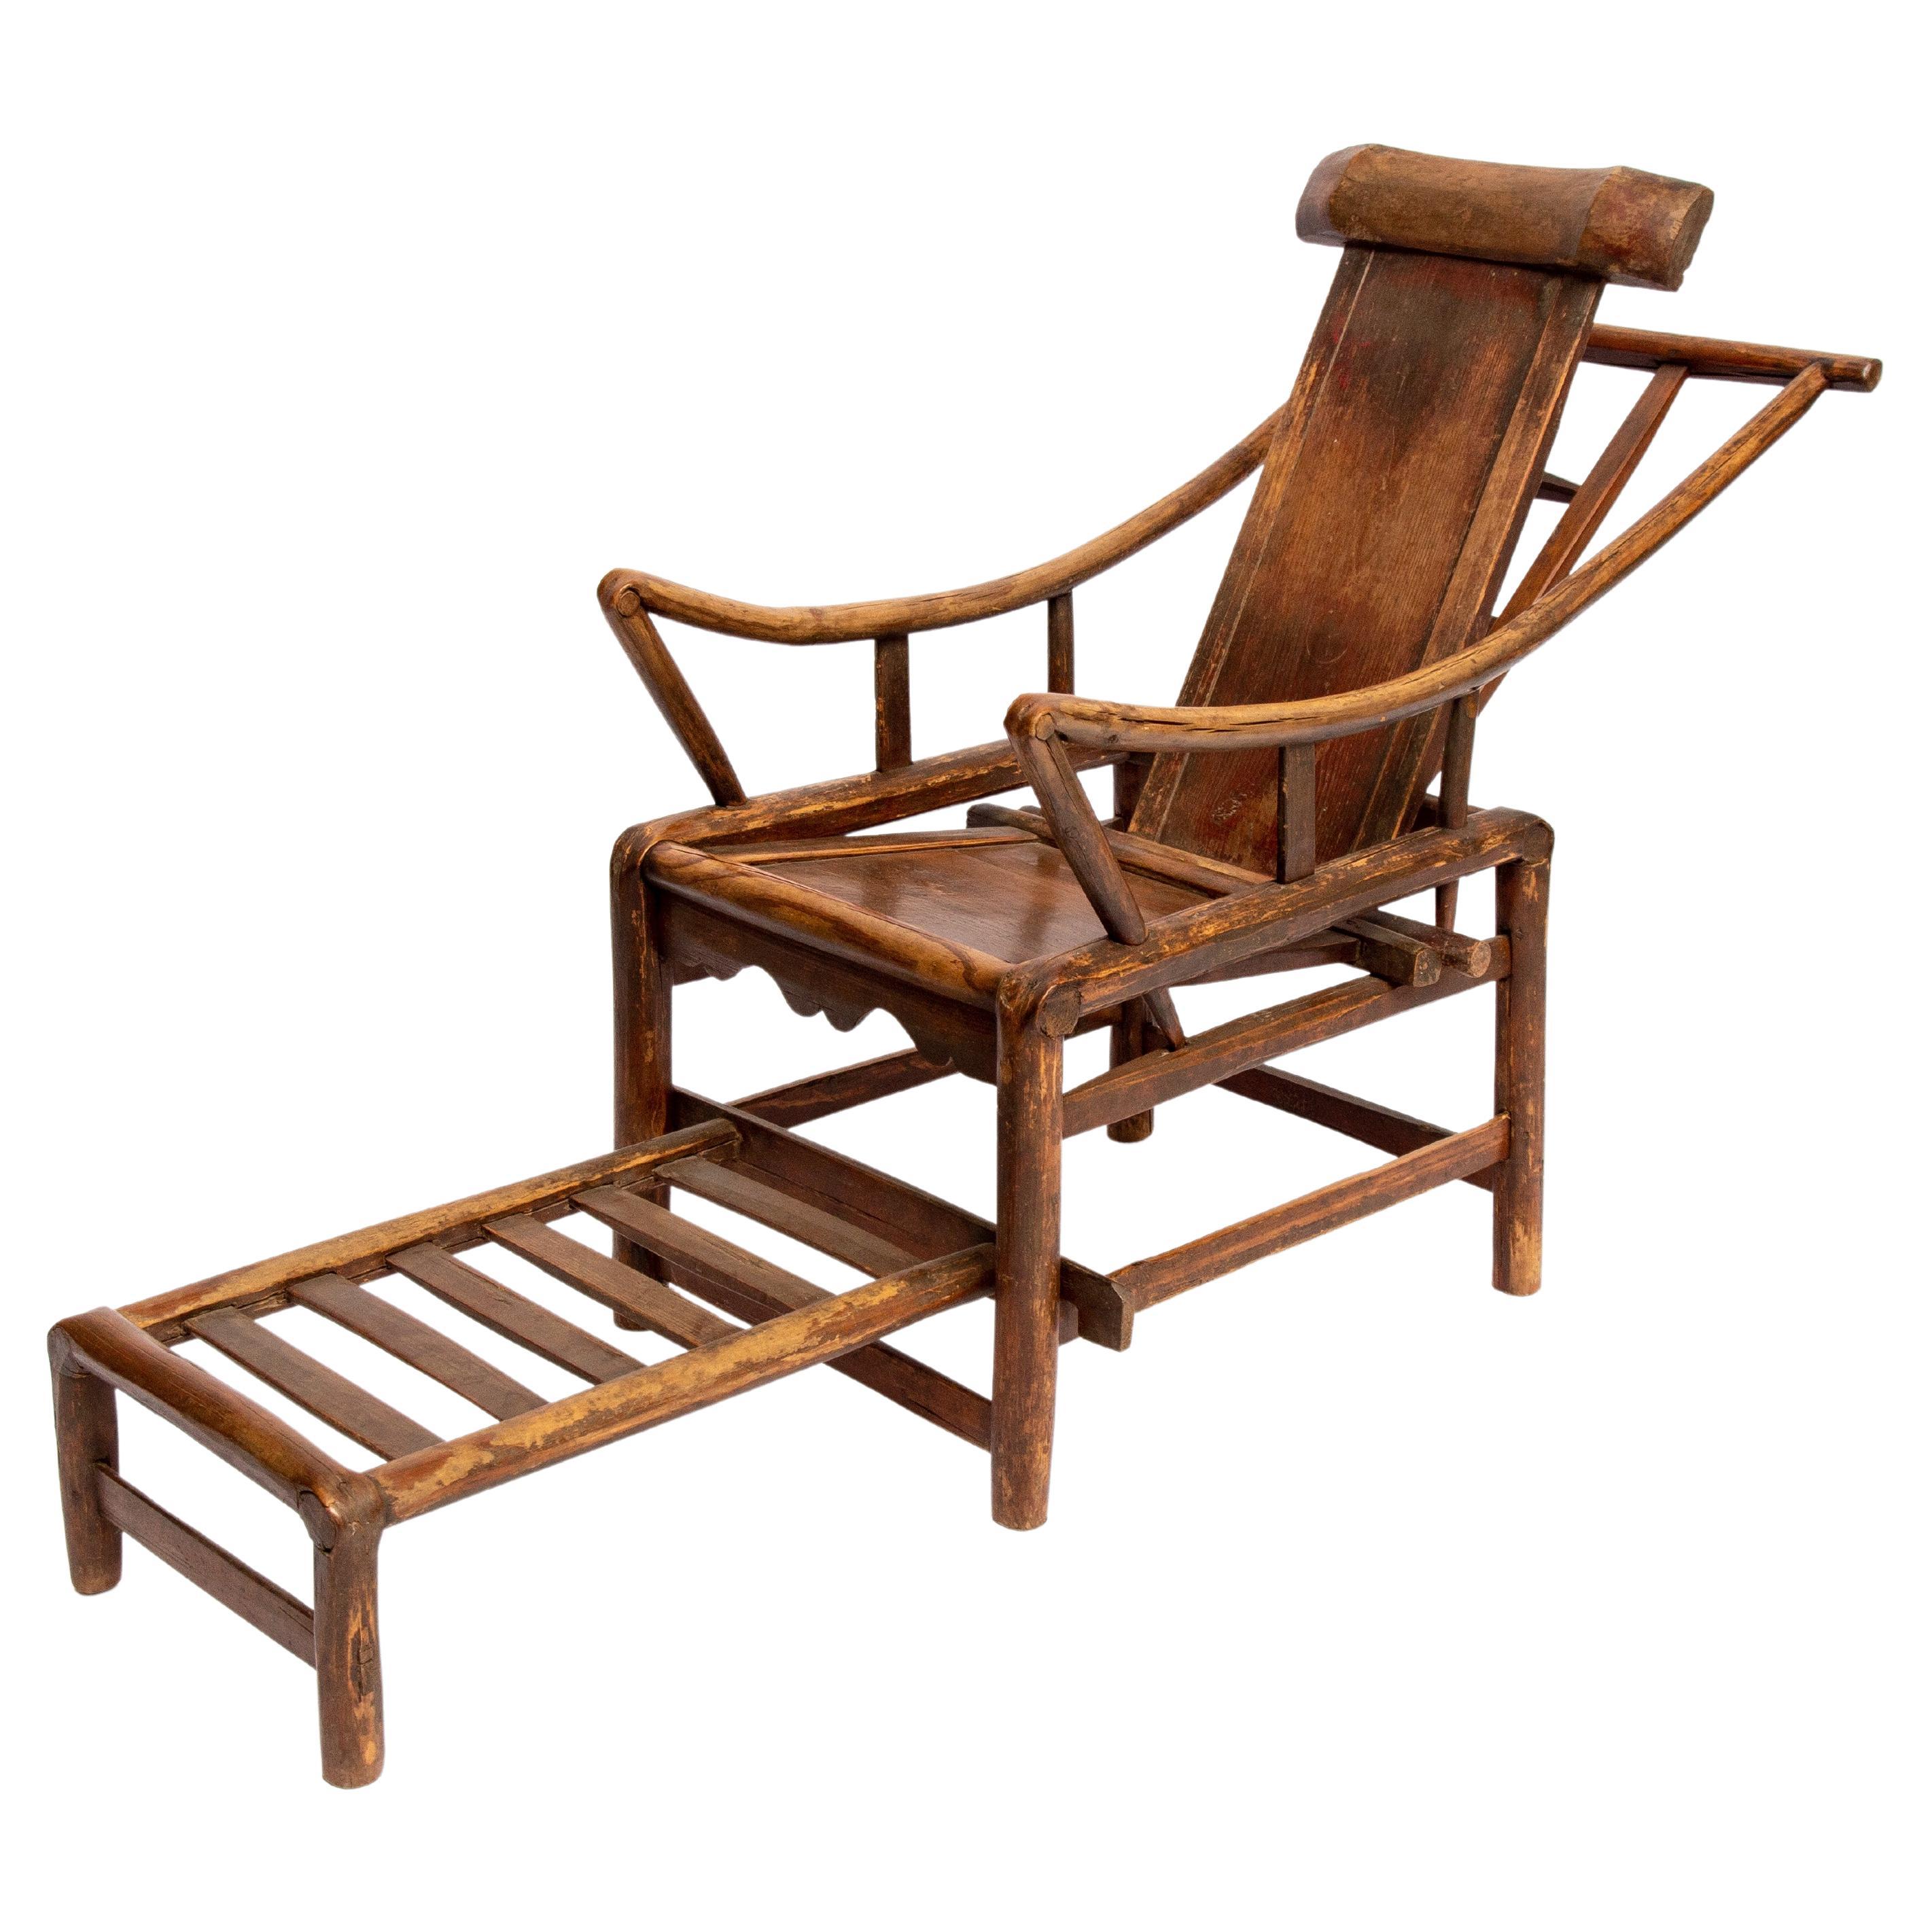 Chinese 19th Century Handcrafted Lounge Chair